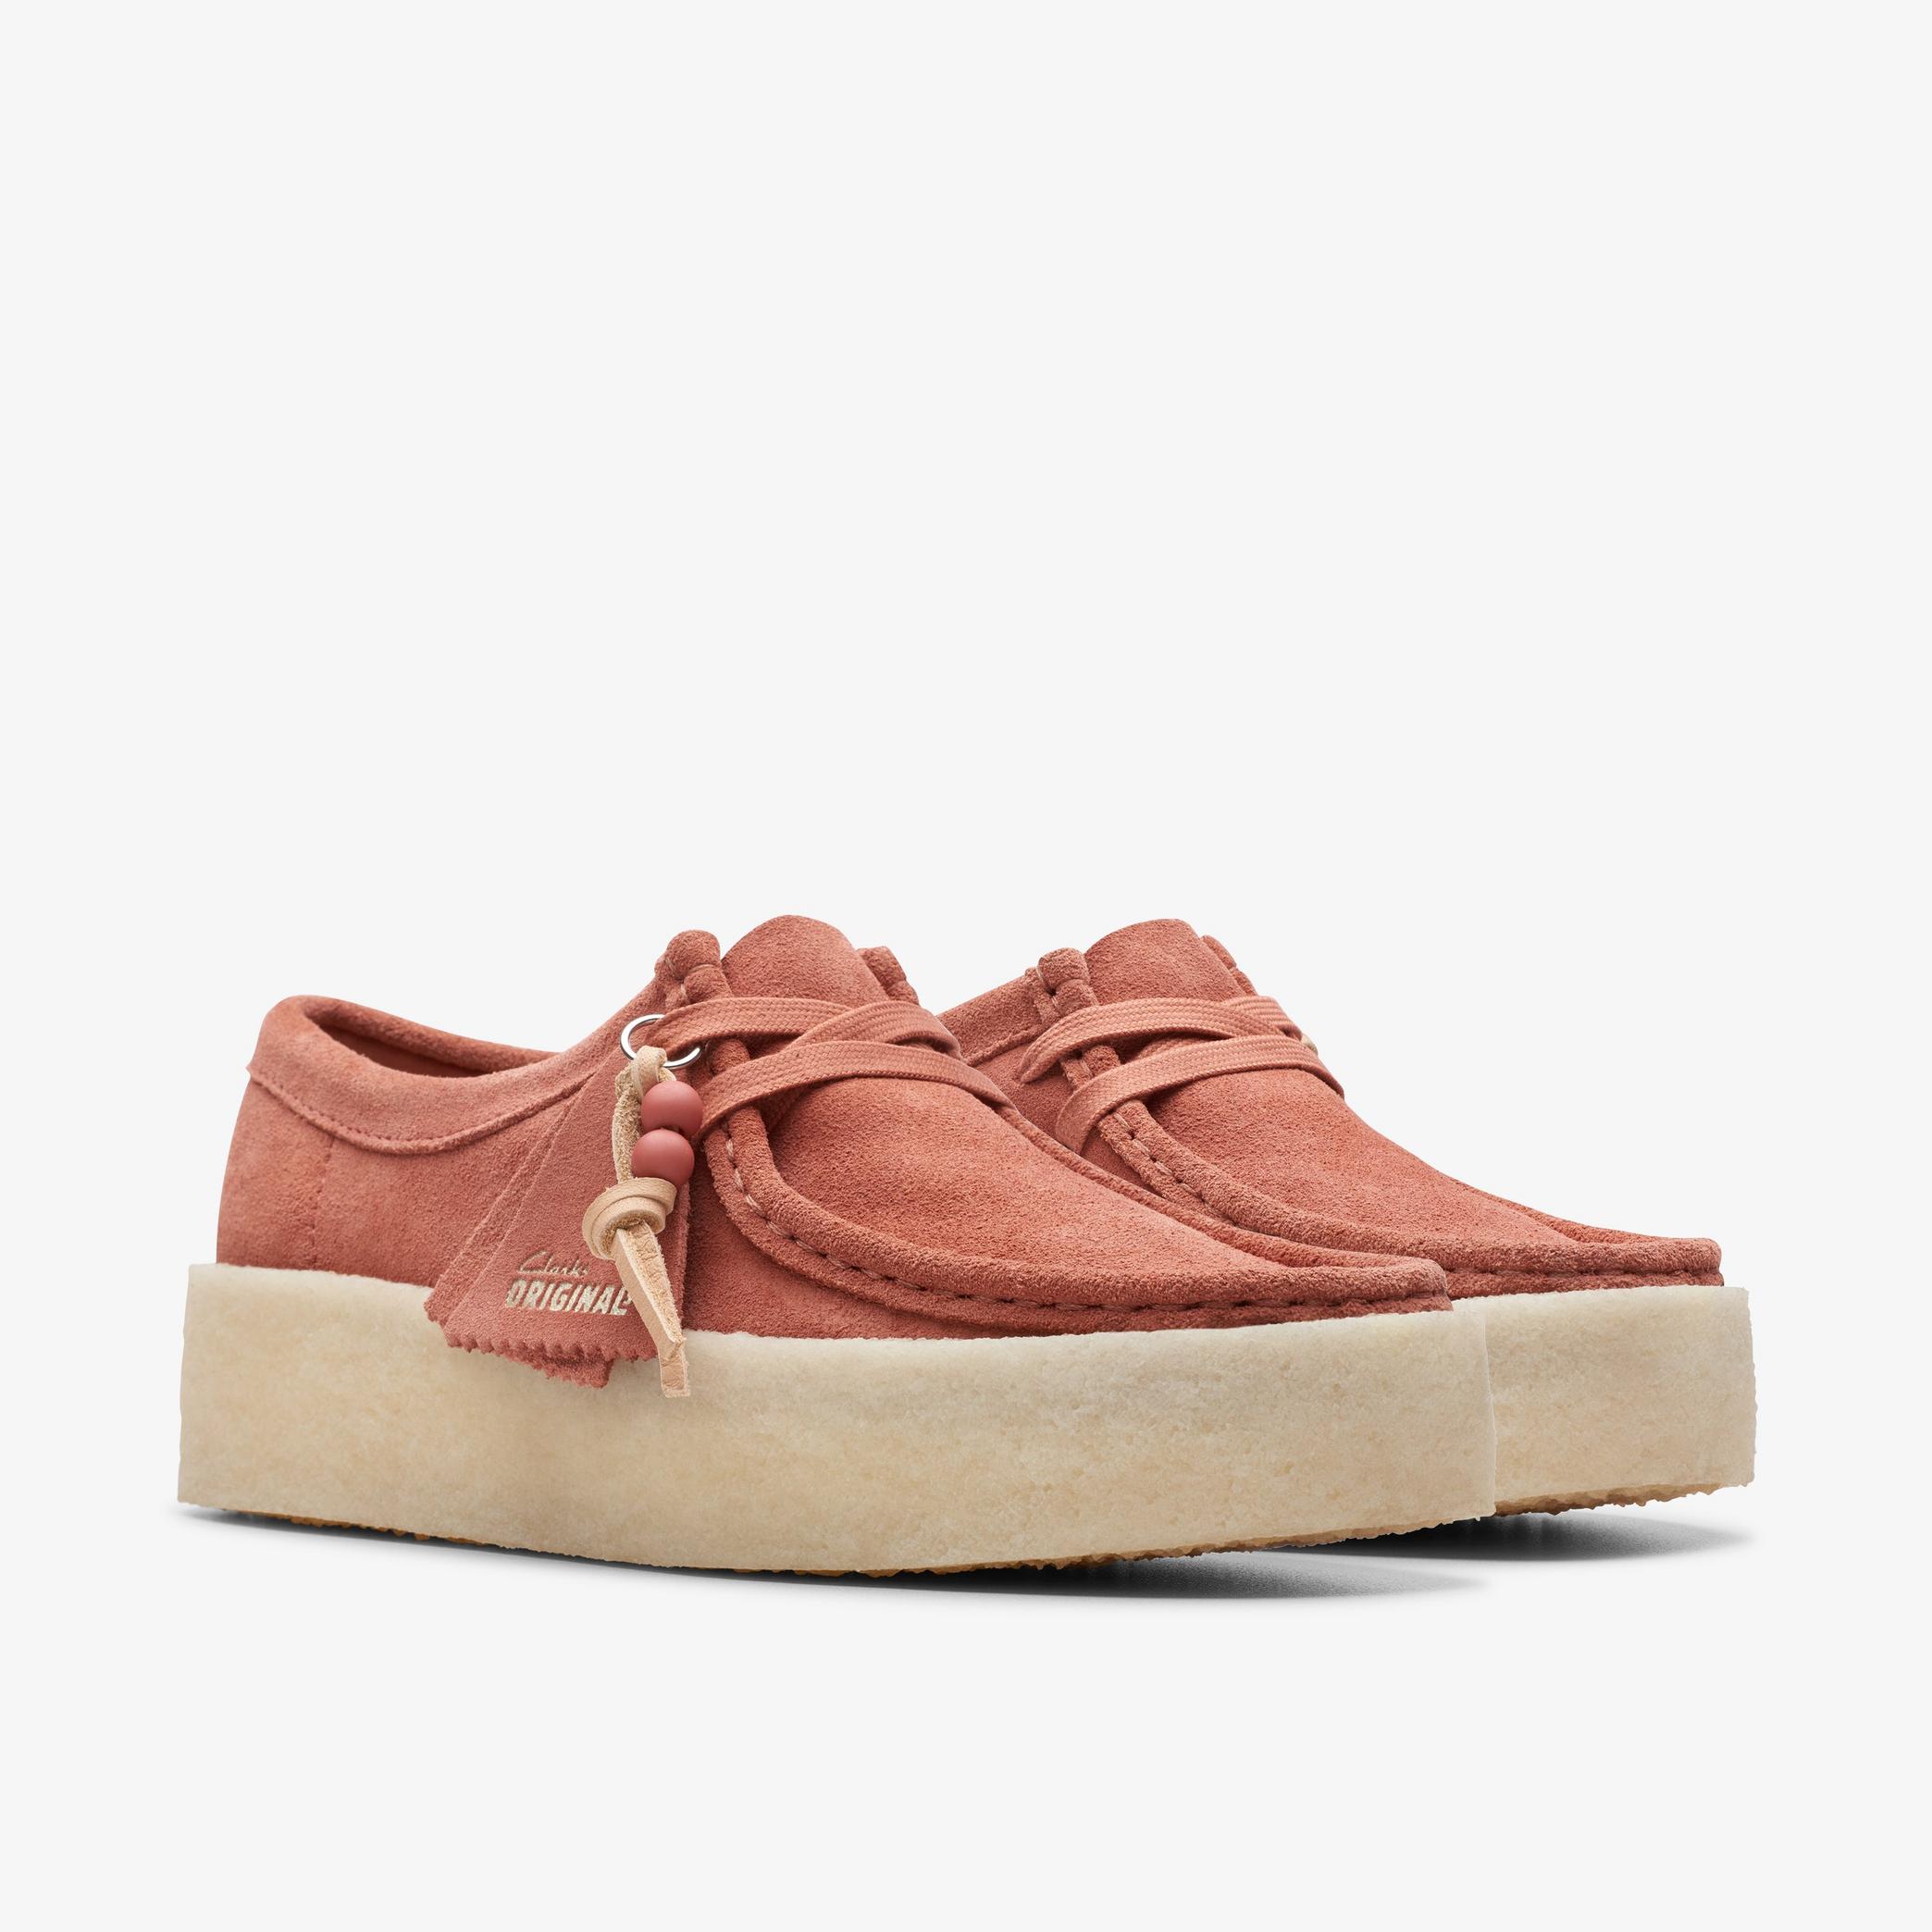 Wallabee Cup Terracotta Suede Wallabee, view 4 of 7